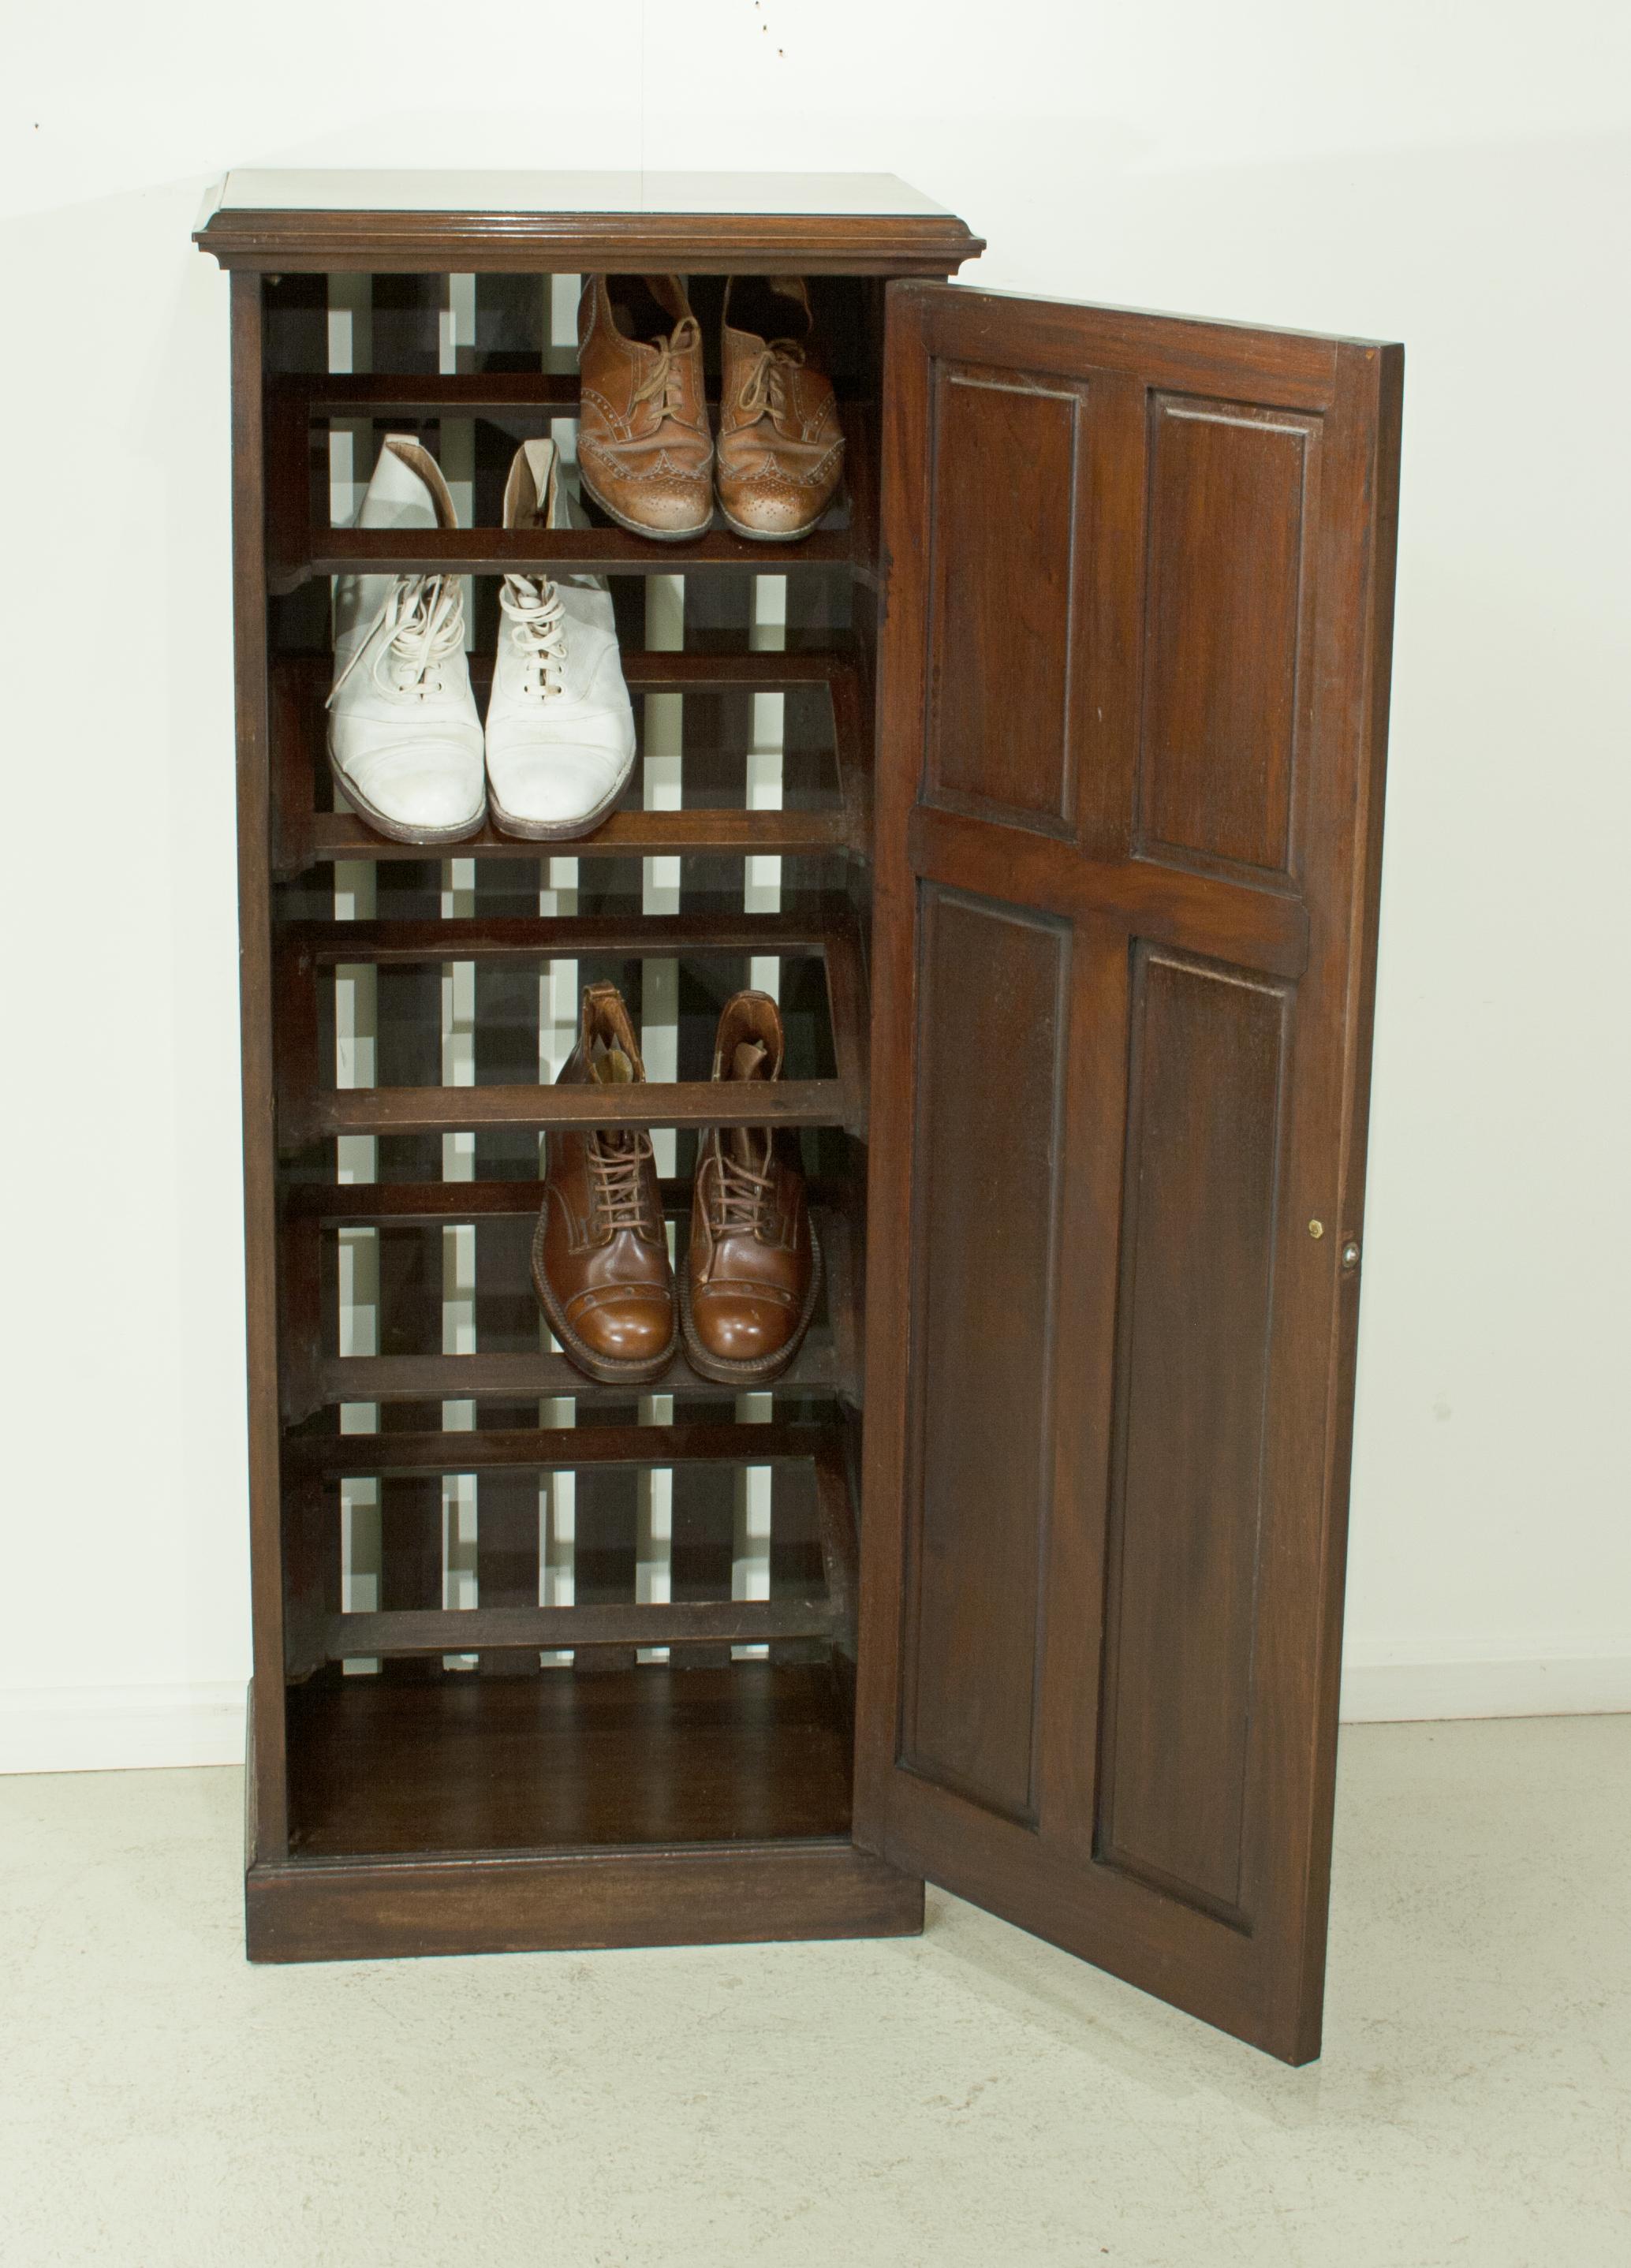 Mahogany shoe cupboard.
A tall slender mahogany cupboard for the sole purpose of shoe storage. This shoe cabinet will tidy up the hall way or bedroom and stop those shoes from cluttering the floor. Crafted from solid mahogany with a four panelled